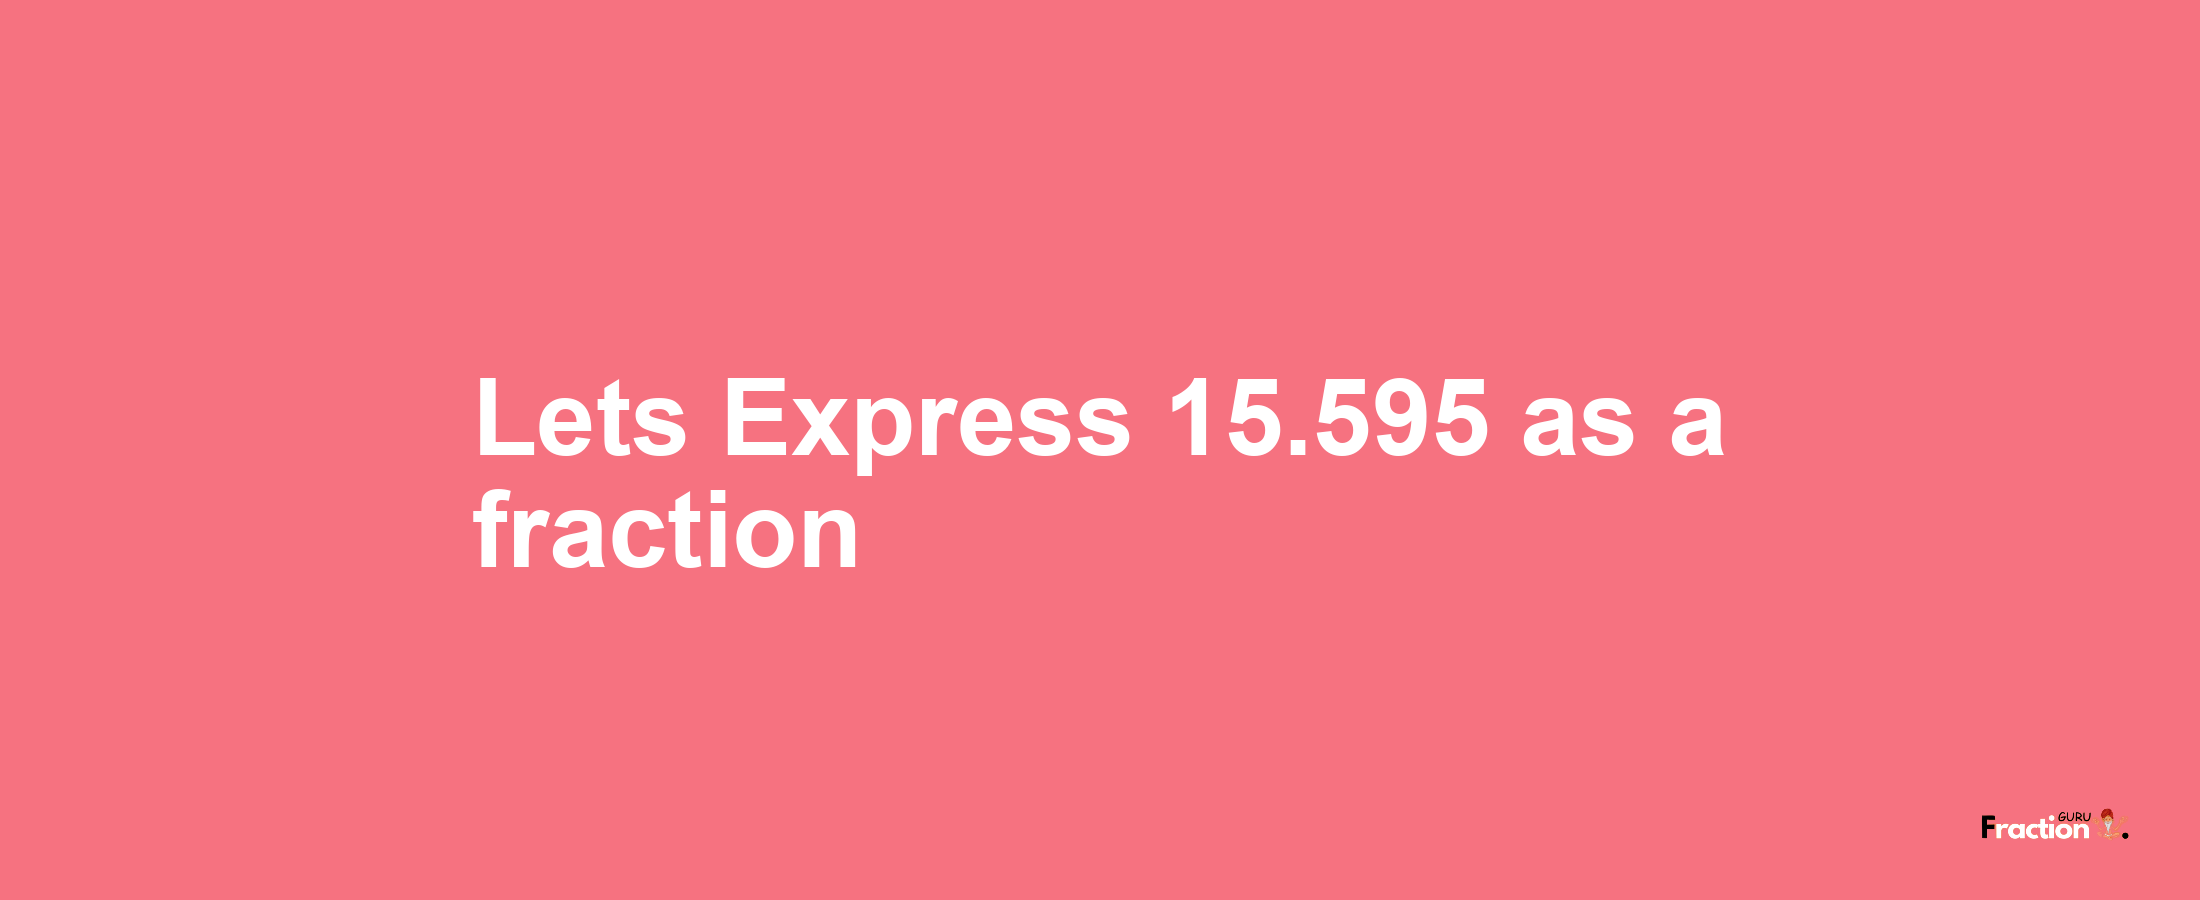 Lets Express 15.595 as afraction